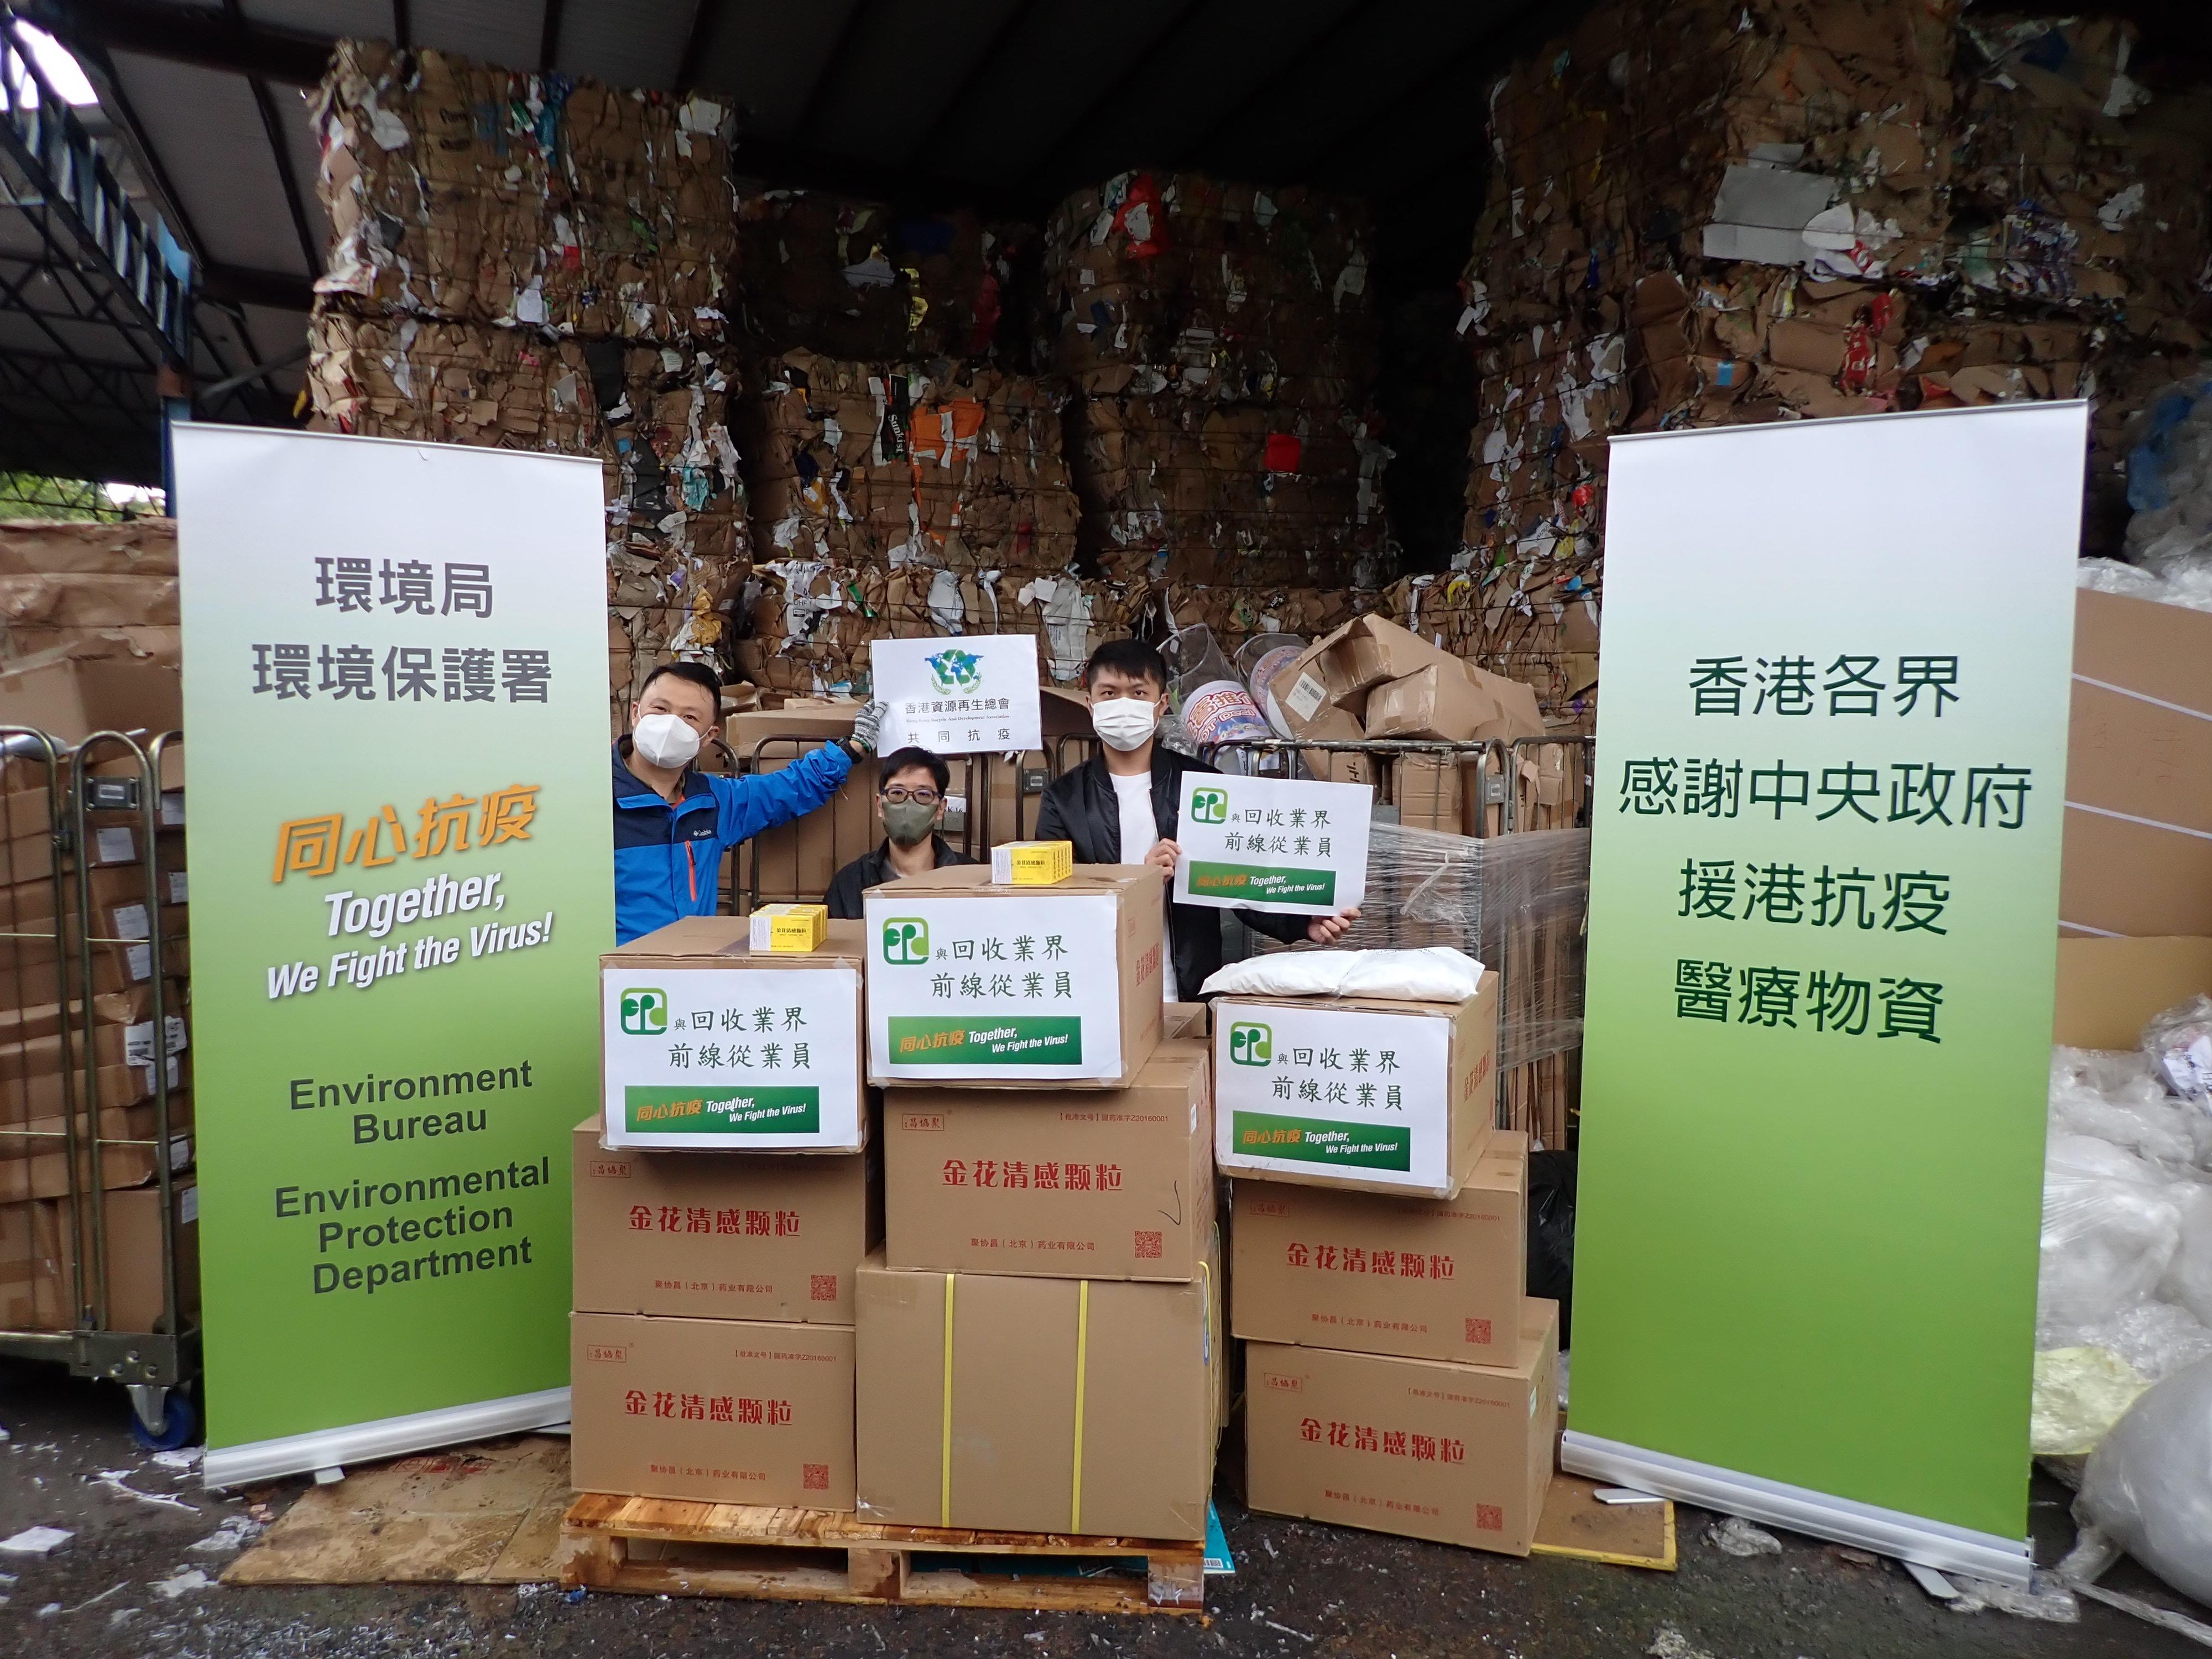 The Environmental Protection Department (EPD) has distributed a total of about 24 000 rapid antigen test (RAT) kits and 24 000 boxes of anti-epidemic proprietary Chinese medicines donated by the Central Government to various recycling trade associations and recycling service contractors, so as to provide anti-epidemic support to the frontline staff. Picture shows EPD staff distributing RAT kits and anti-epidemic proprietary Chinese medicines to a representative of the Hong Kong Recycle and Development Association.